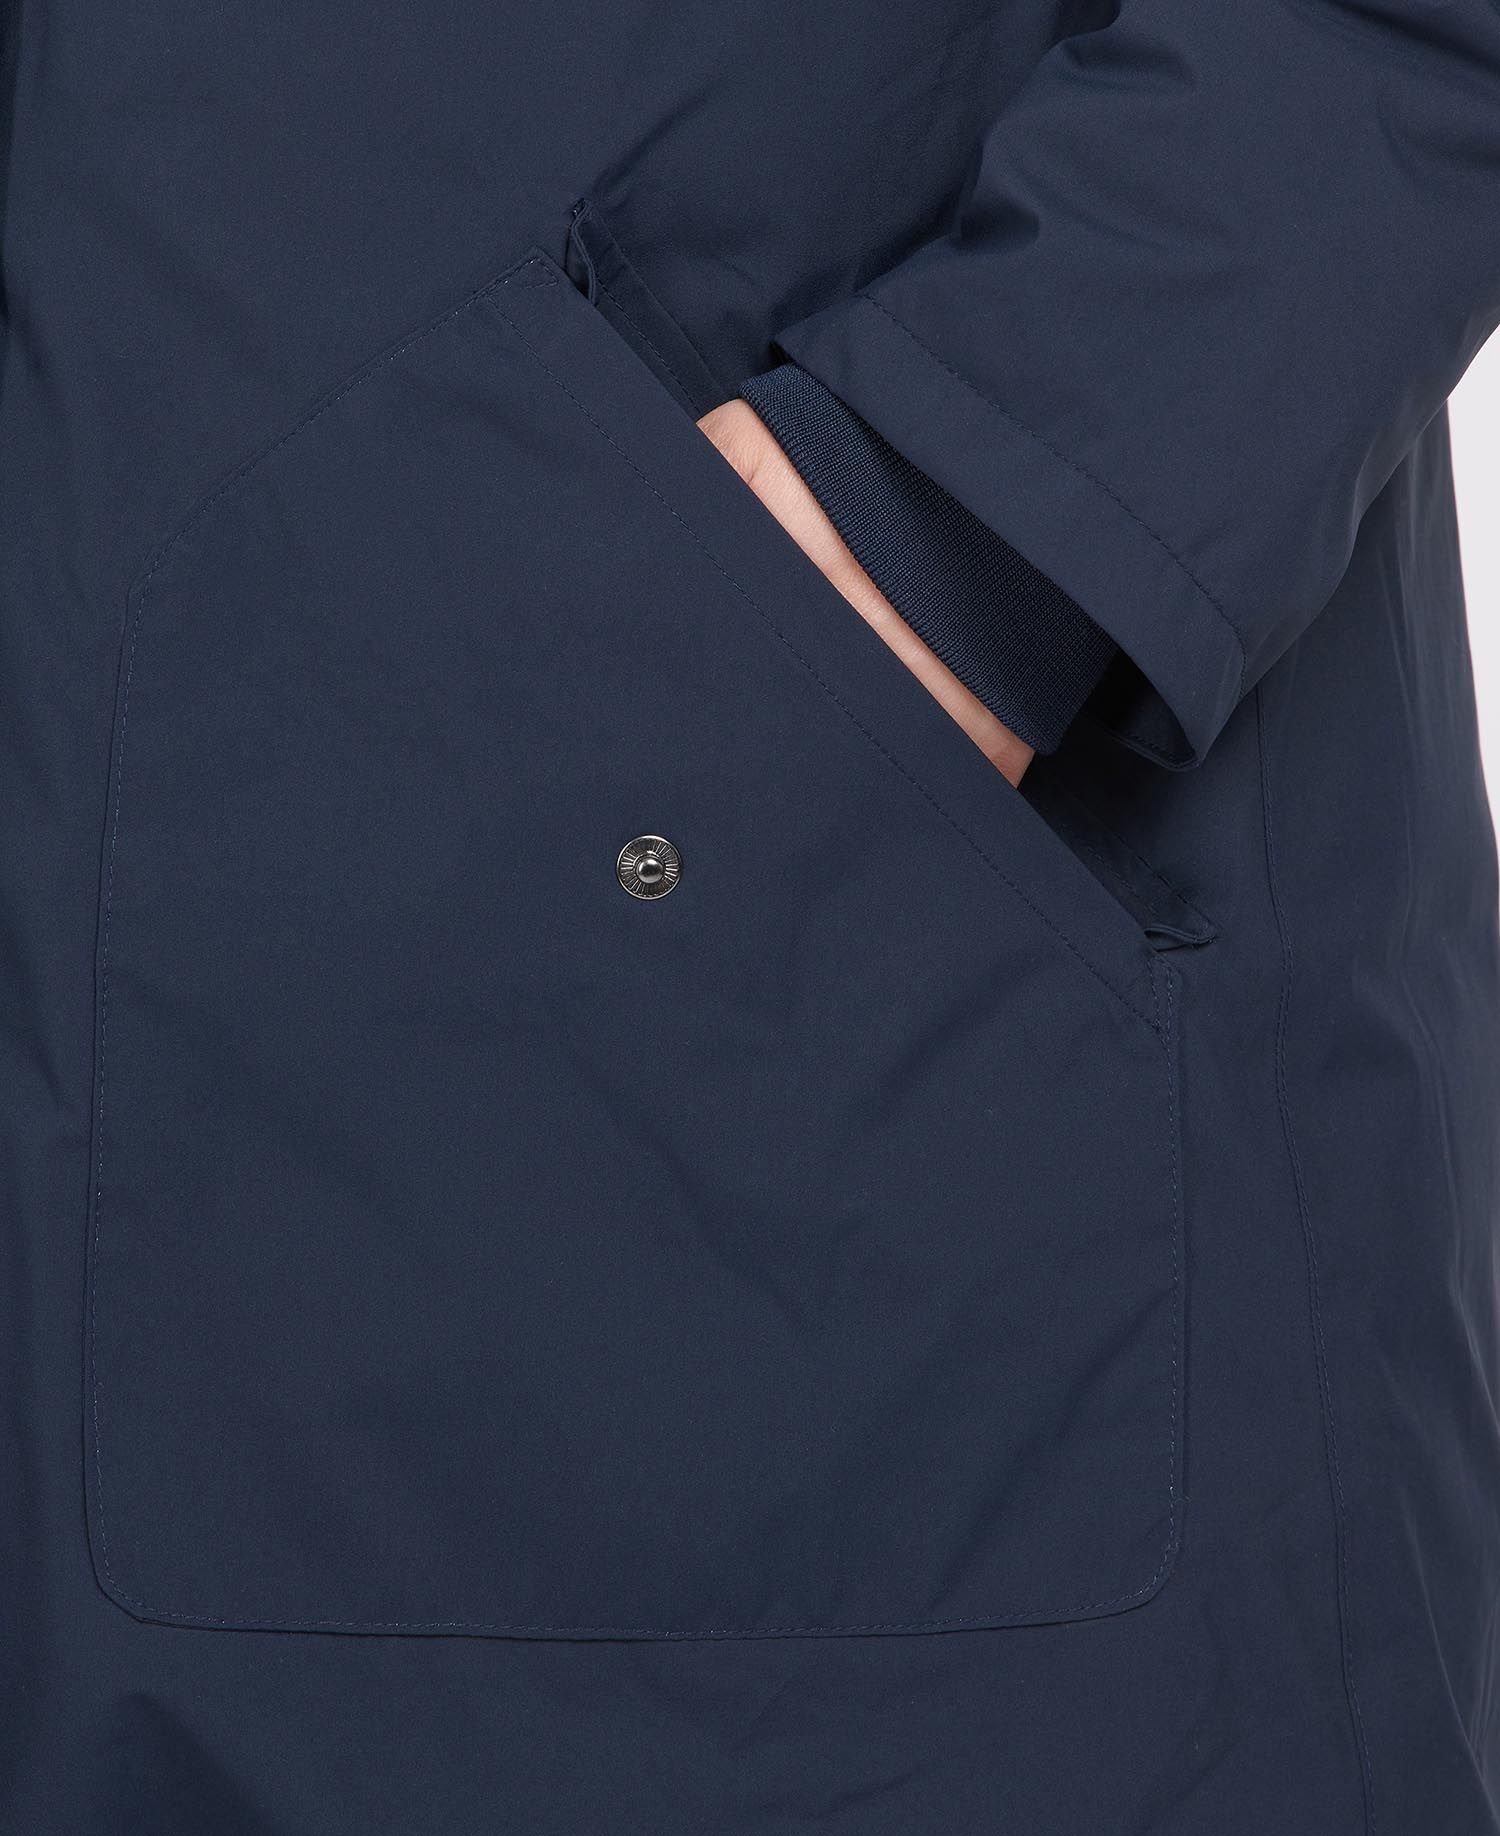 BARBOUR LOWGOS WATERPROOF BREATHABLE JACKET NAVY - Aston Bourne